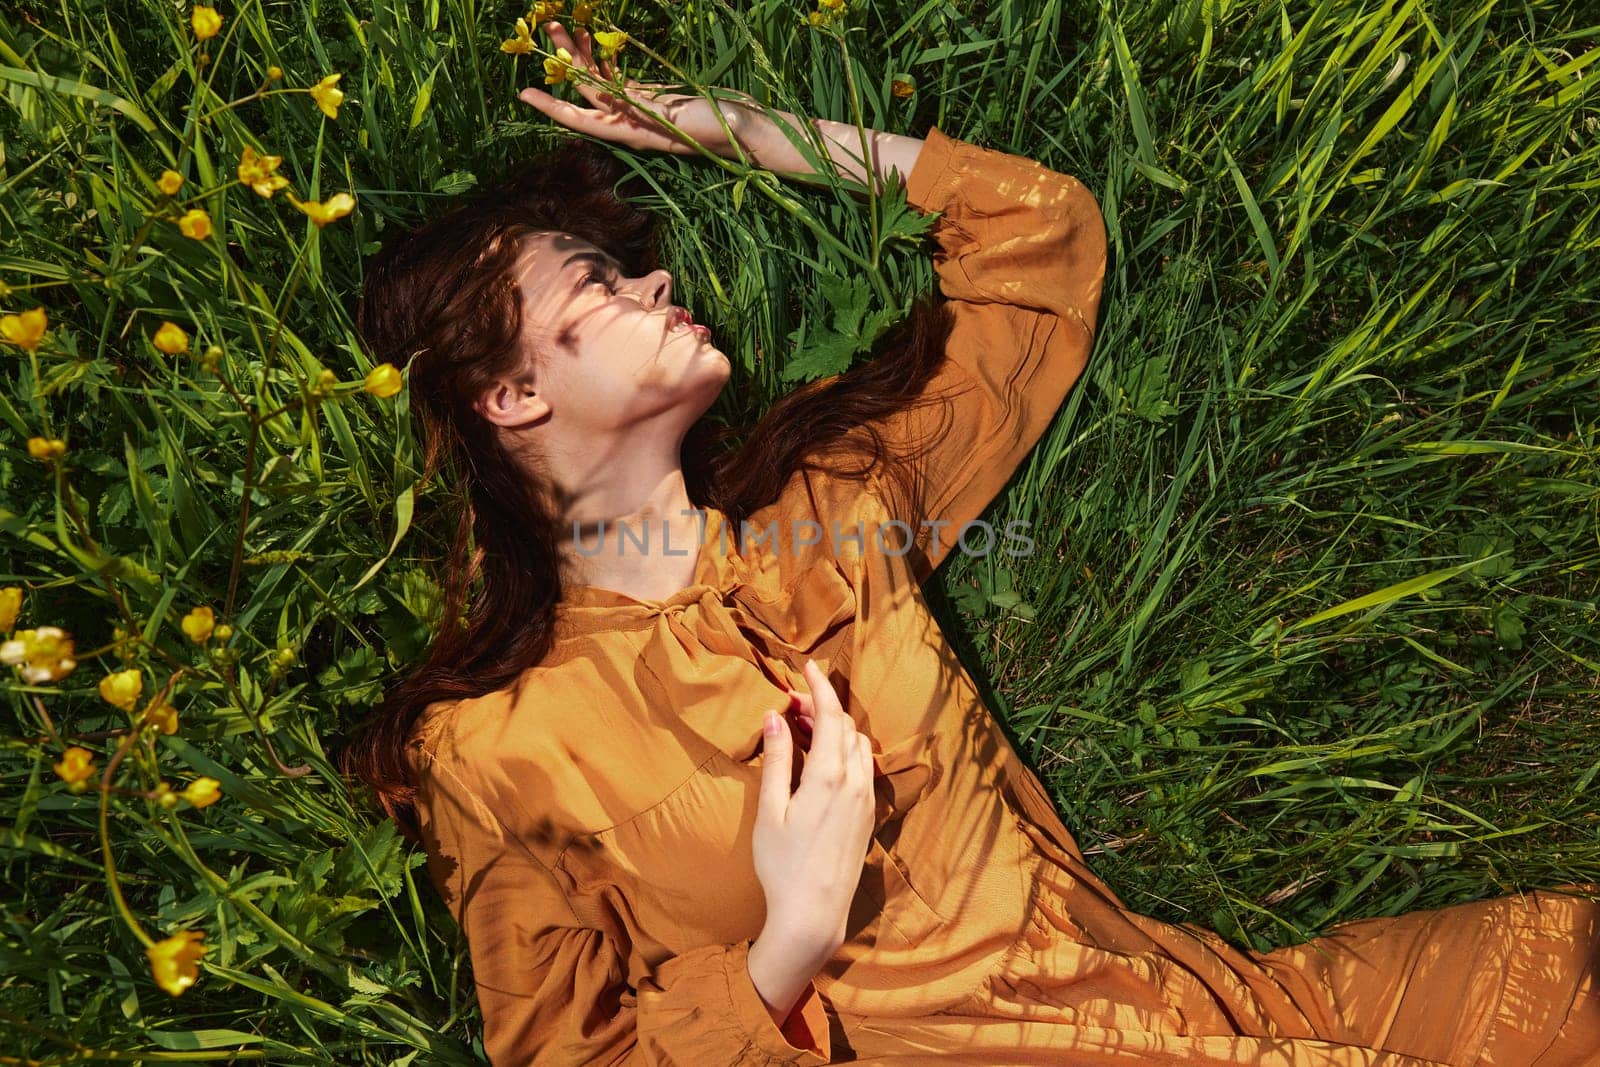 a calm woman with long red hair lies in a green field with yellow flowers, in an orange dress with her eyes closed, holding her hand near her face, enjoying peace and recuperating. High quality photo